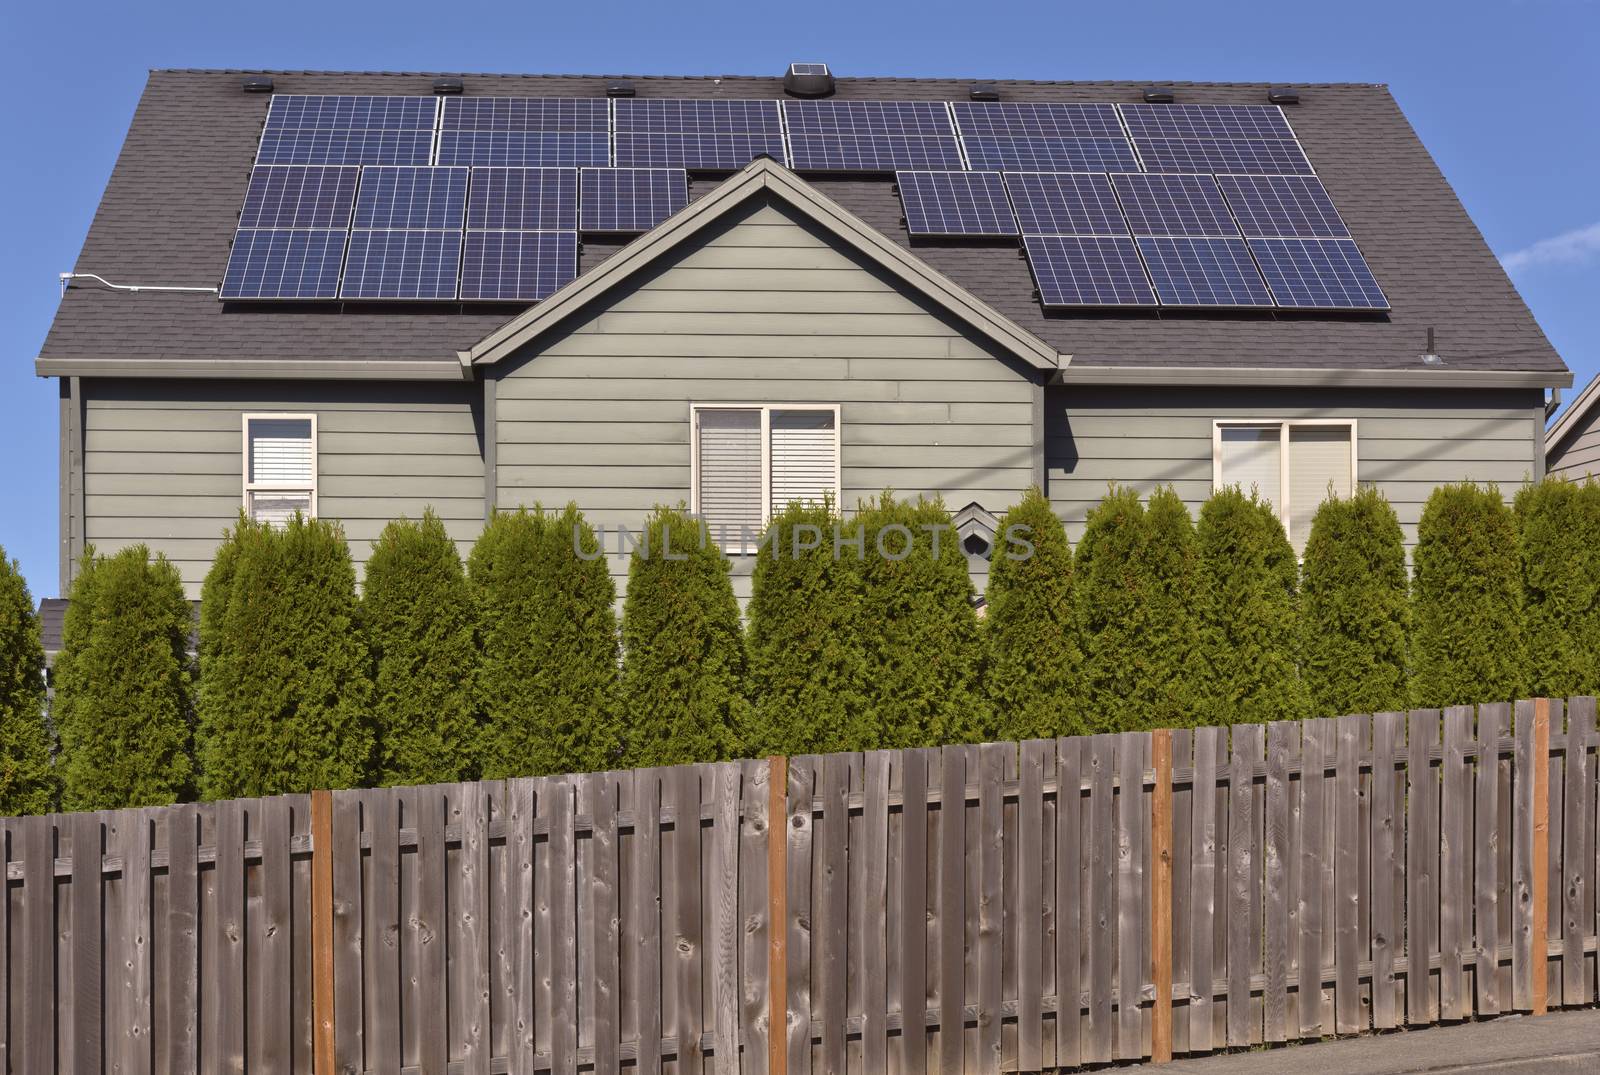 Solar panels facing the sun on a roof of a house.